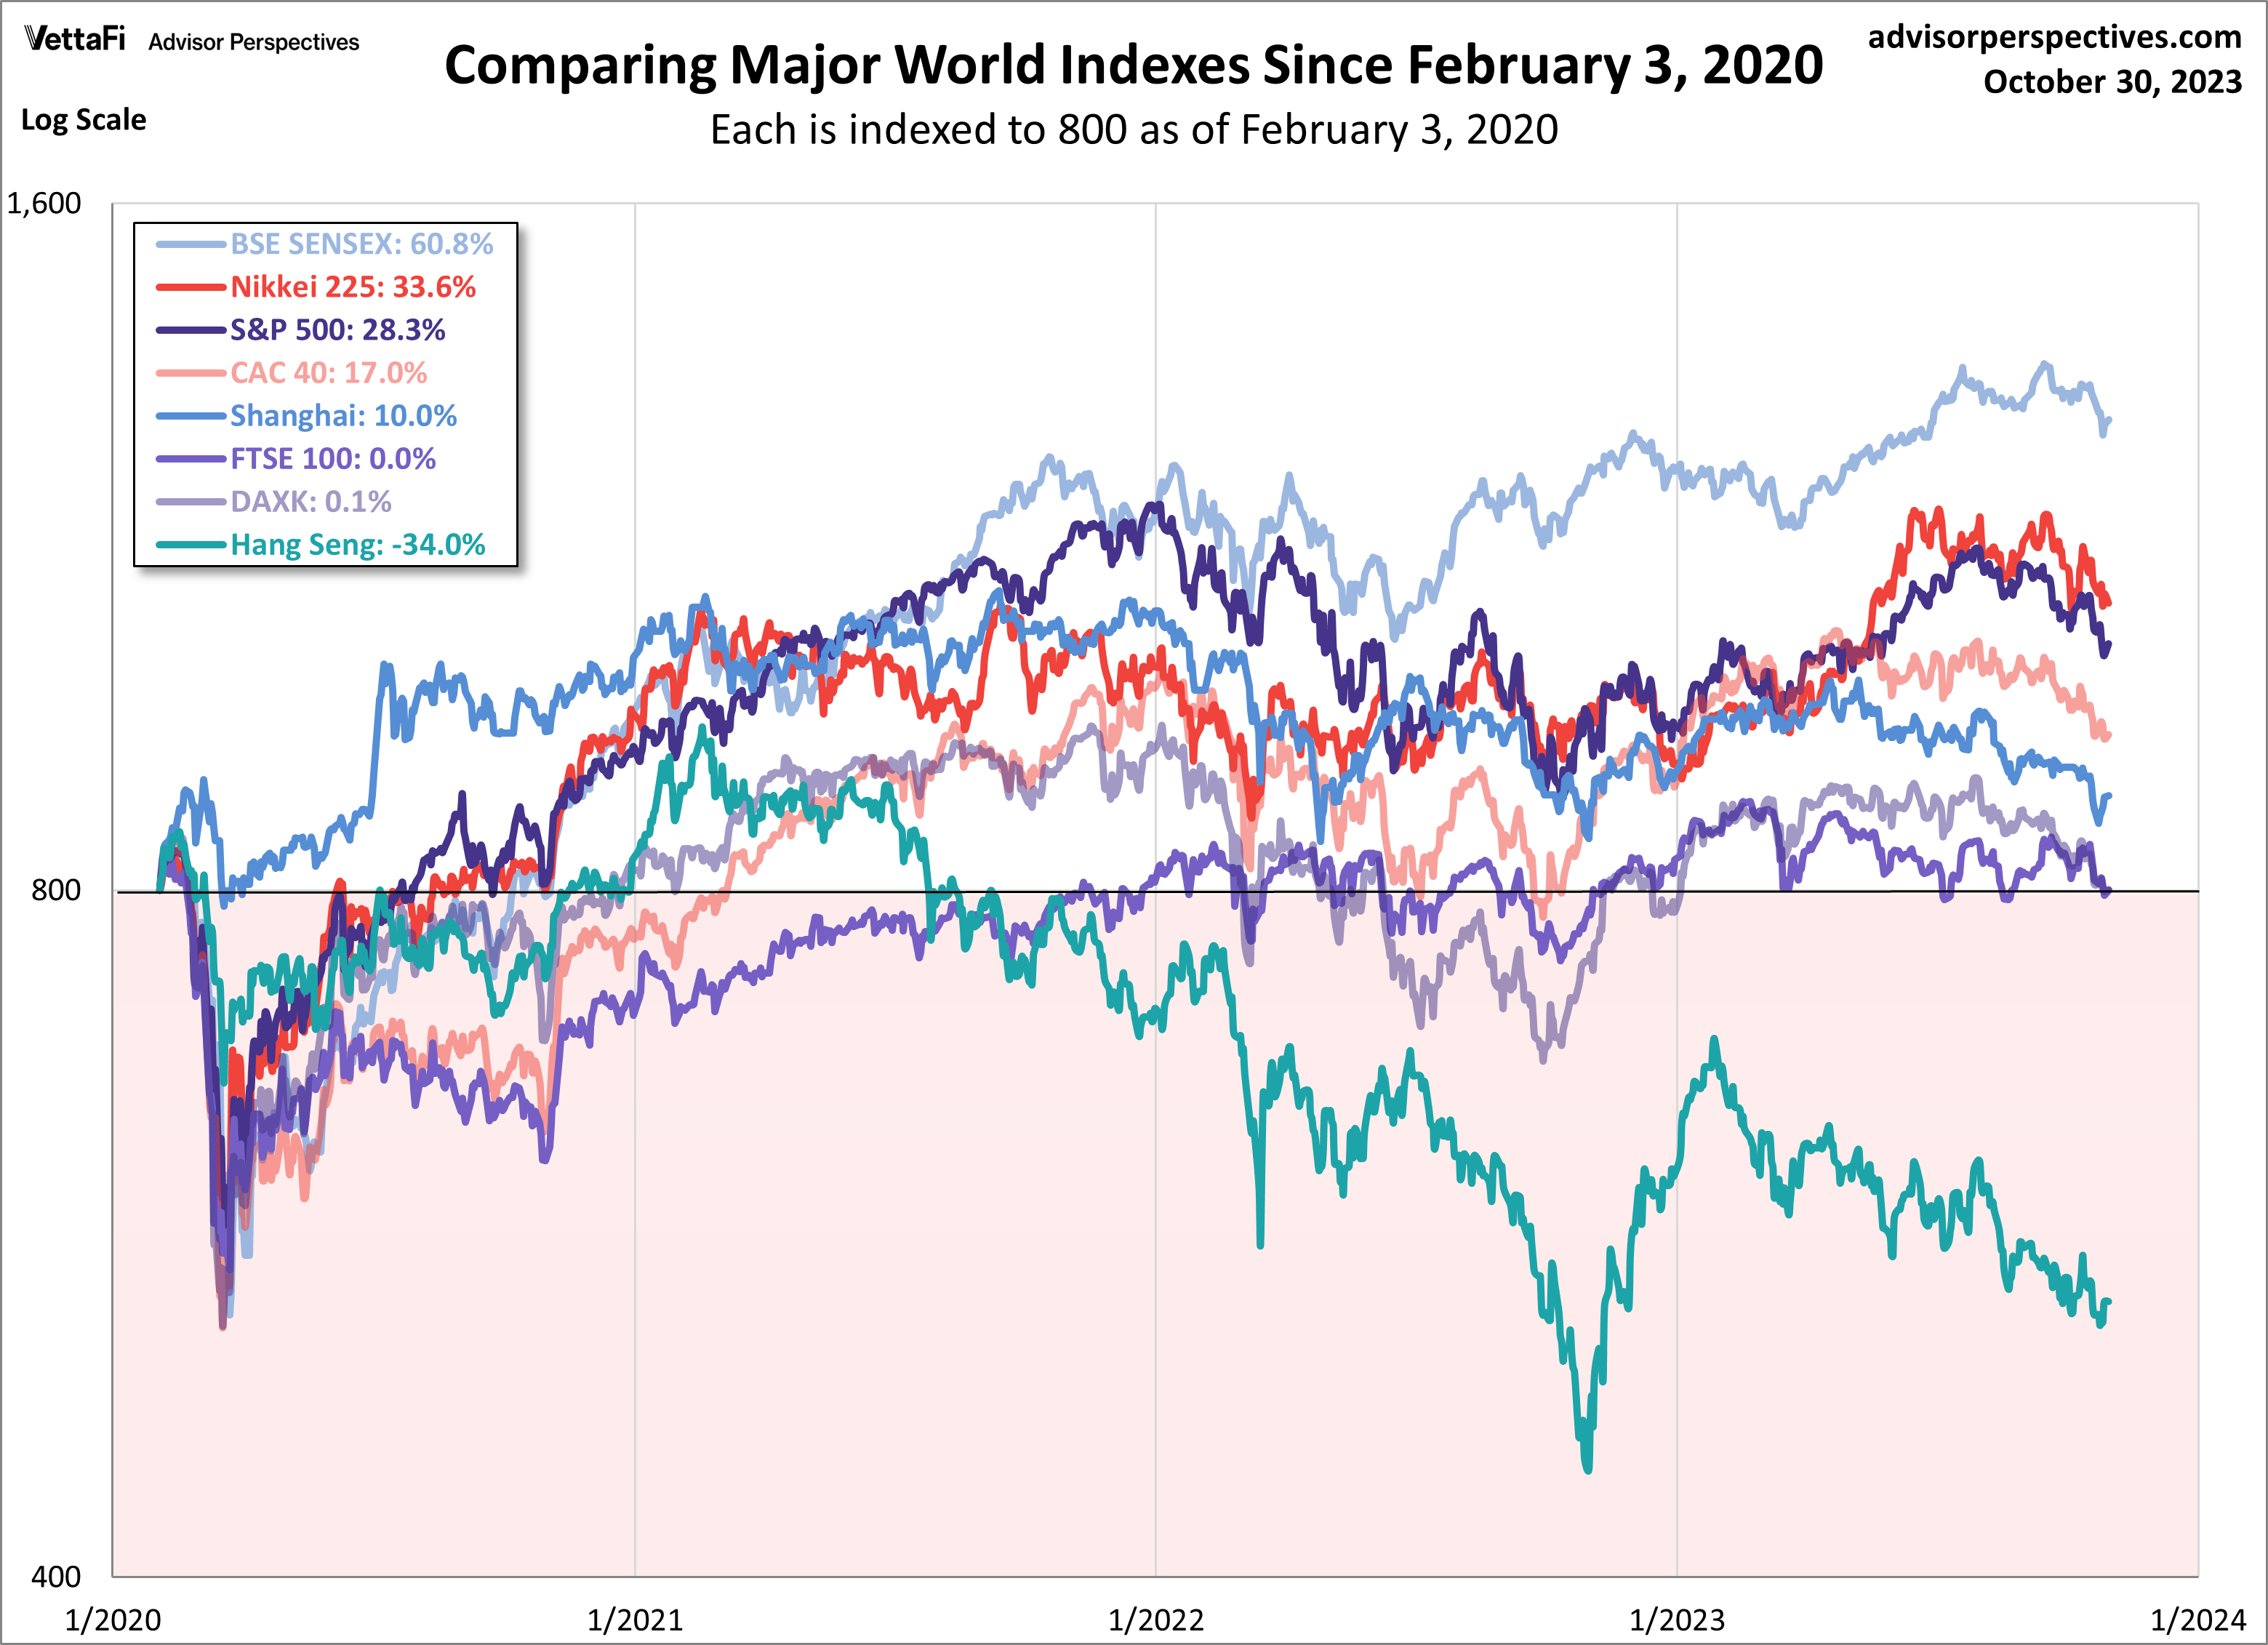 Comparing Major World Indexes since Feb. 3 2020